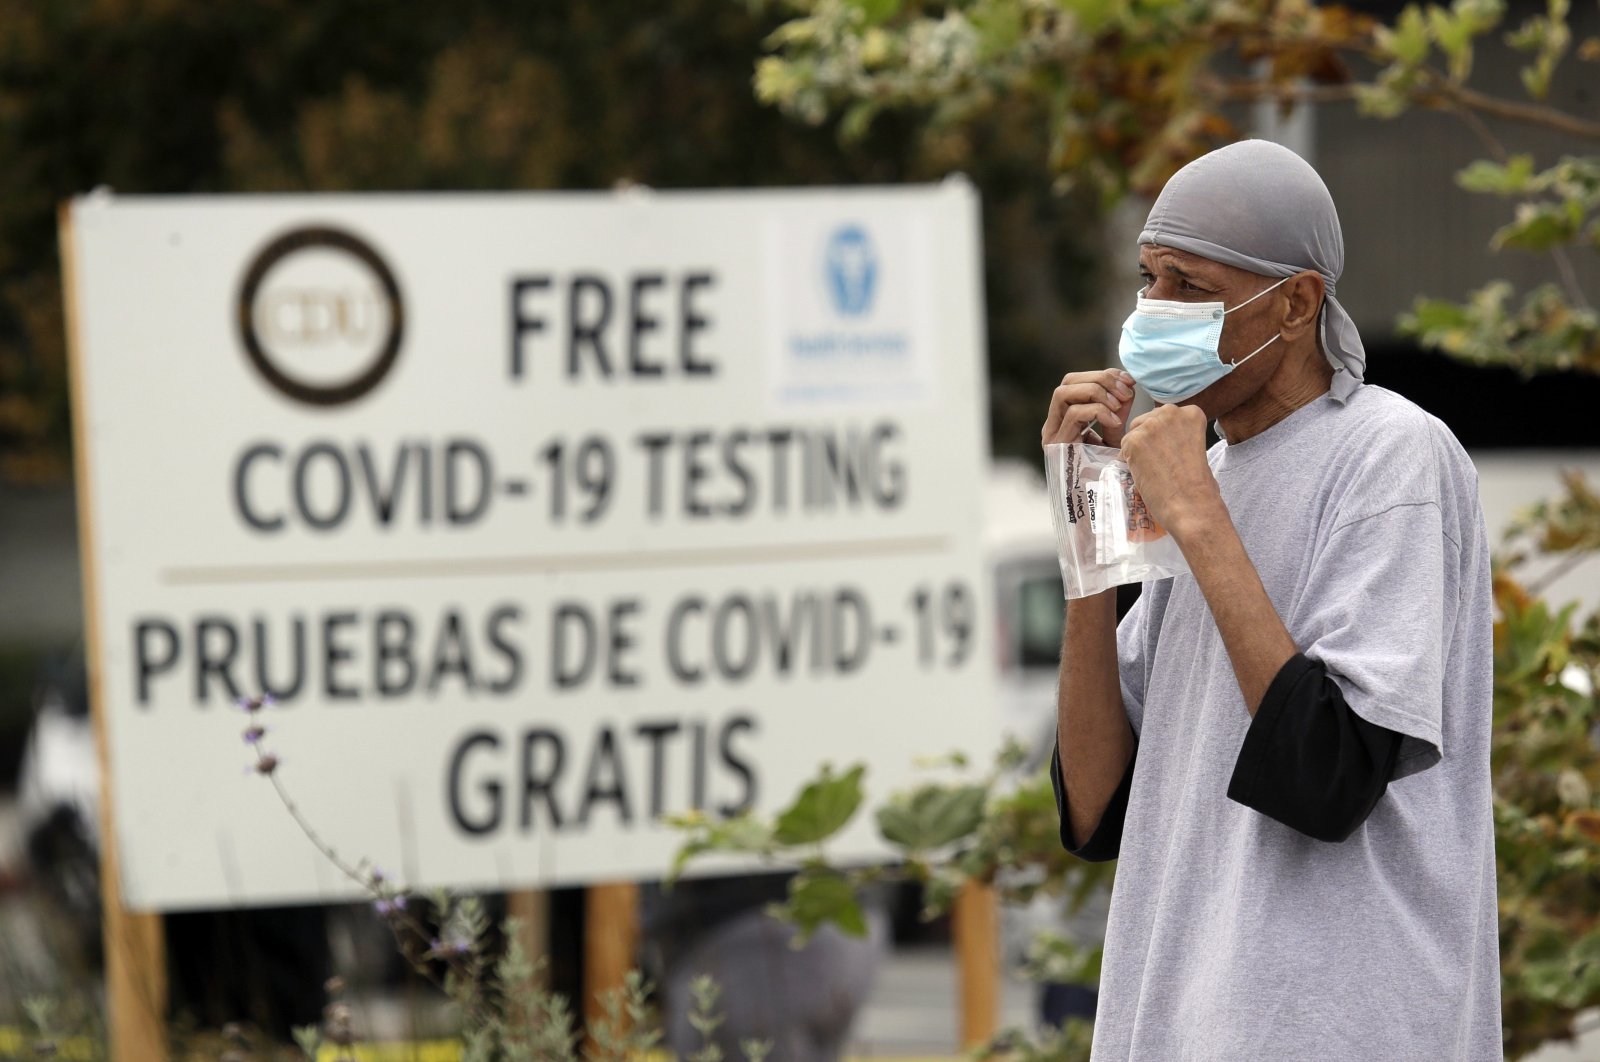 A man takes a coronavirus test at a mobile site at the Charles Drew University of Medicine and Science, Los Angeles, California, U.S., July 22, 2020. (AP Photo)